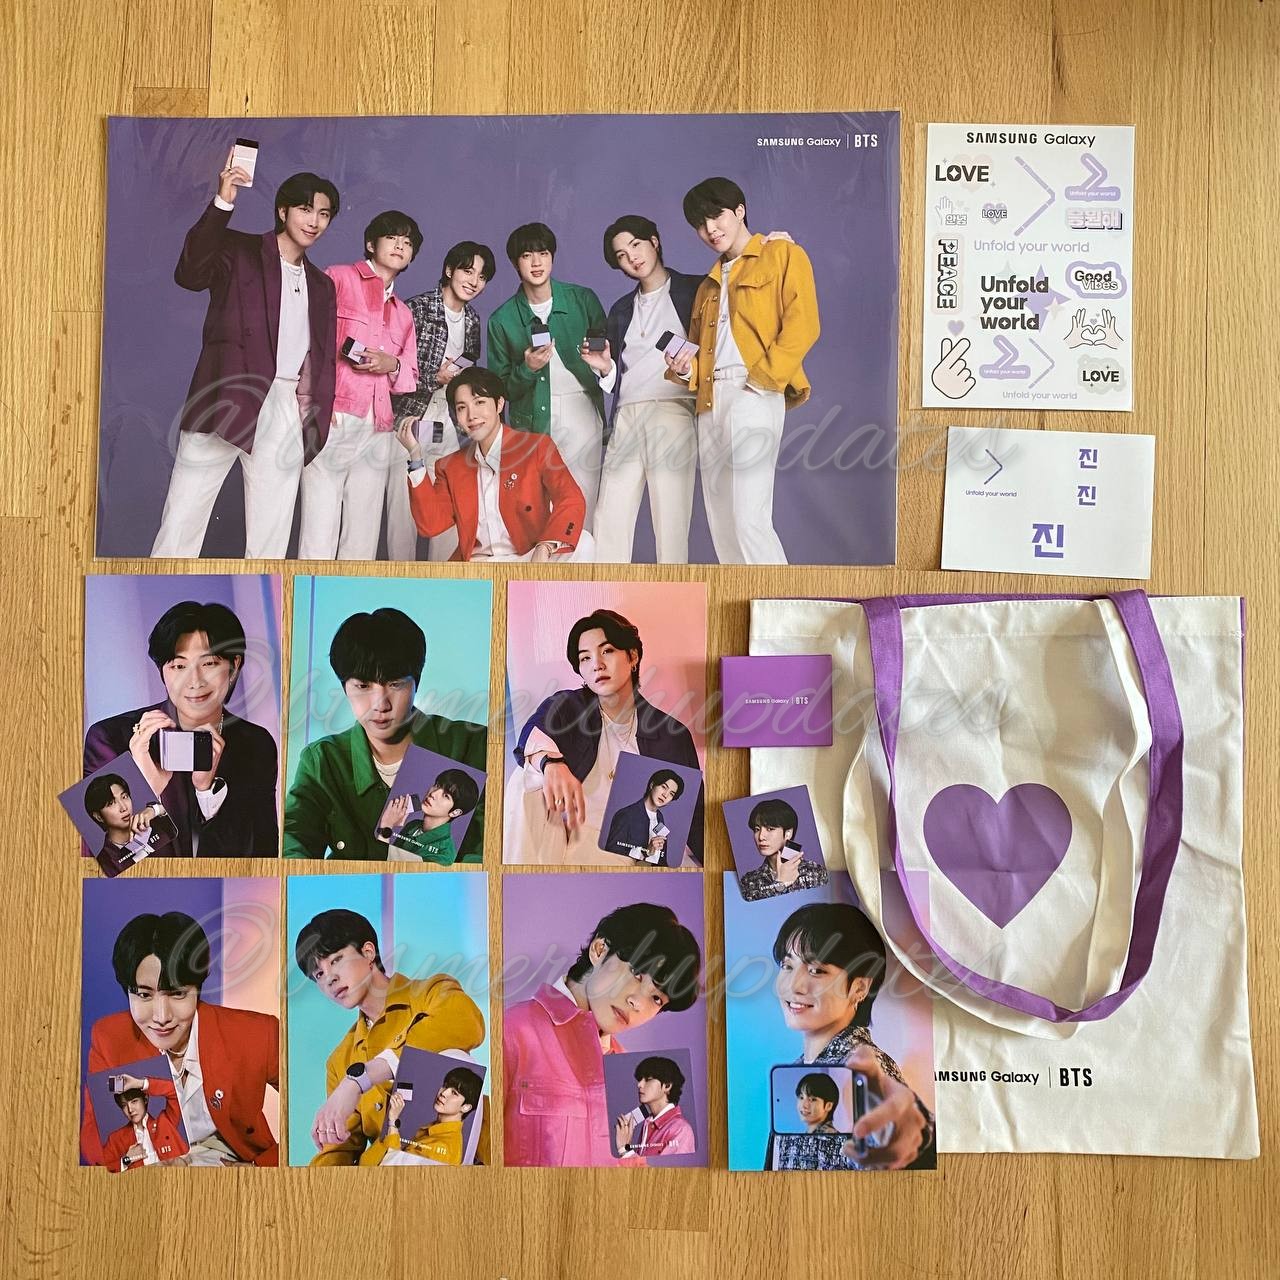 🥢BTS ⟭⟬ Merch⁷⟬⟭🔍⍤⃝🔎 on X: Samsung Galaxy Unpacked pop-up in London and  NYC Runs through Aug 31 Collect stamps for going through the experience  Gifts - Sticker - Tote bag - Postcards 